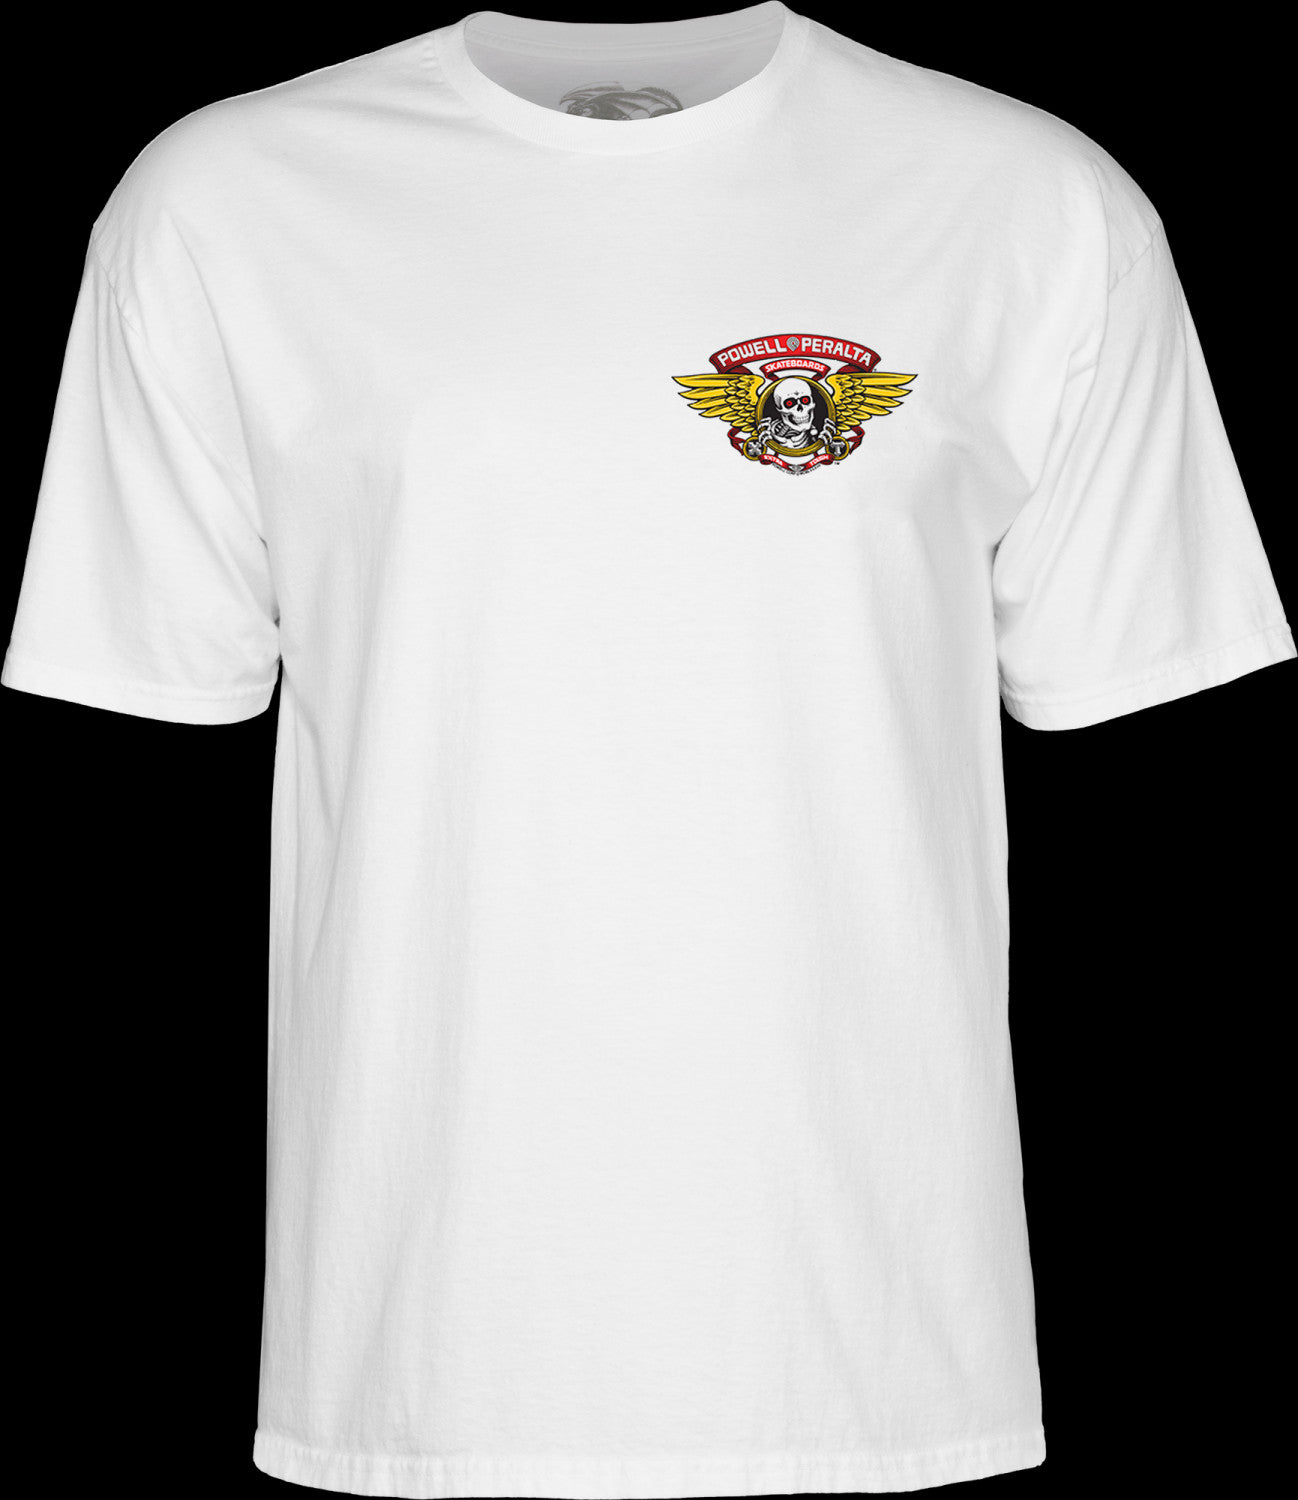 Powell Peralta Winged Ripper S/S Tee White S